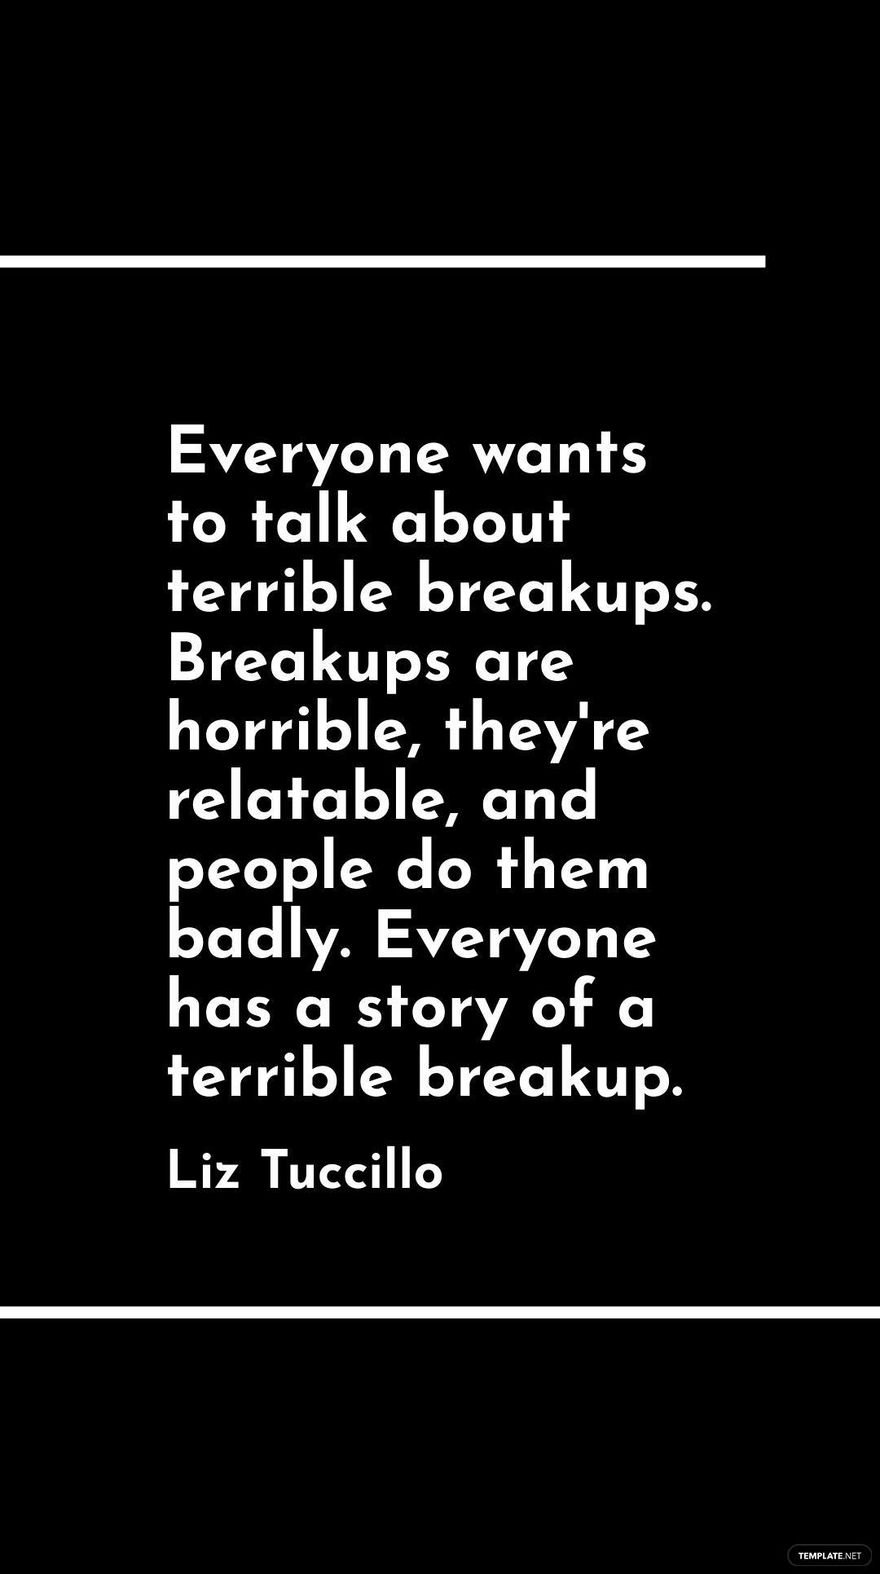 Liz Tuccillo - Everyone wants to talk about terrible breakups. Breakups are horrible, they're relatable, and people do them badly. Everyone has a story of a terrible breakup.